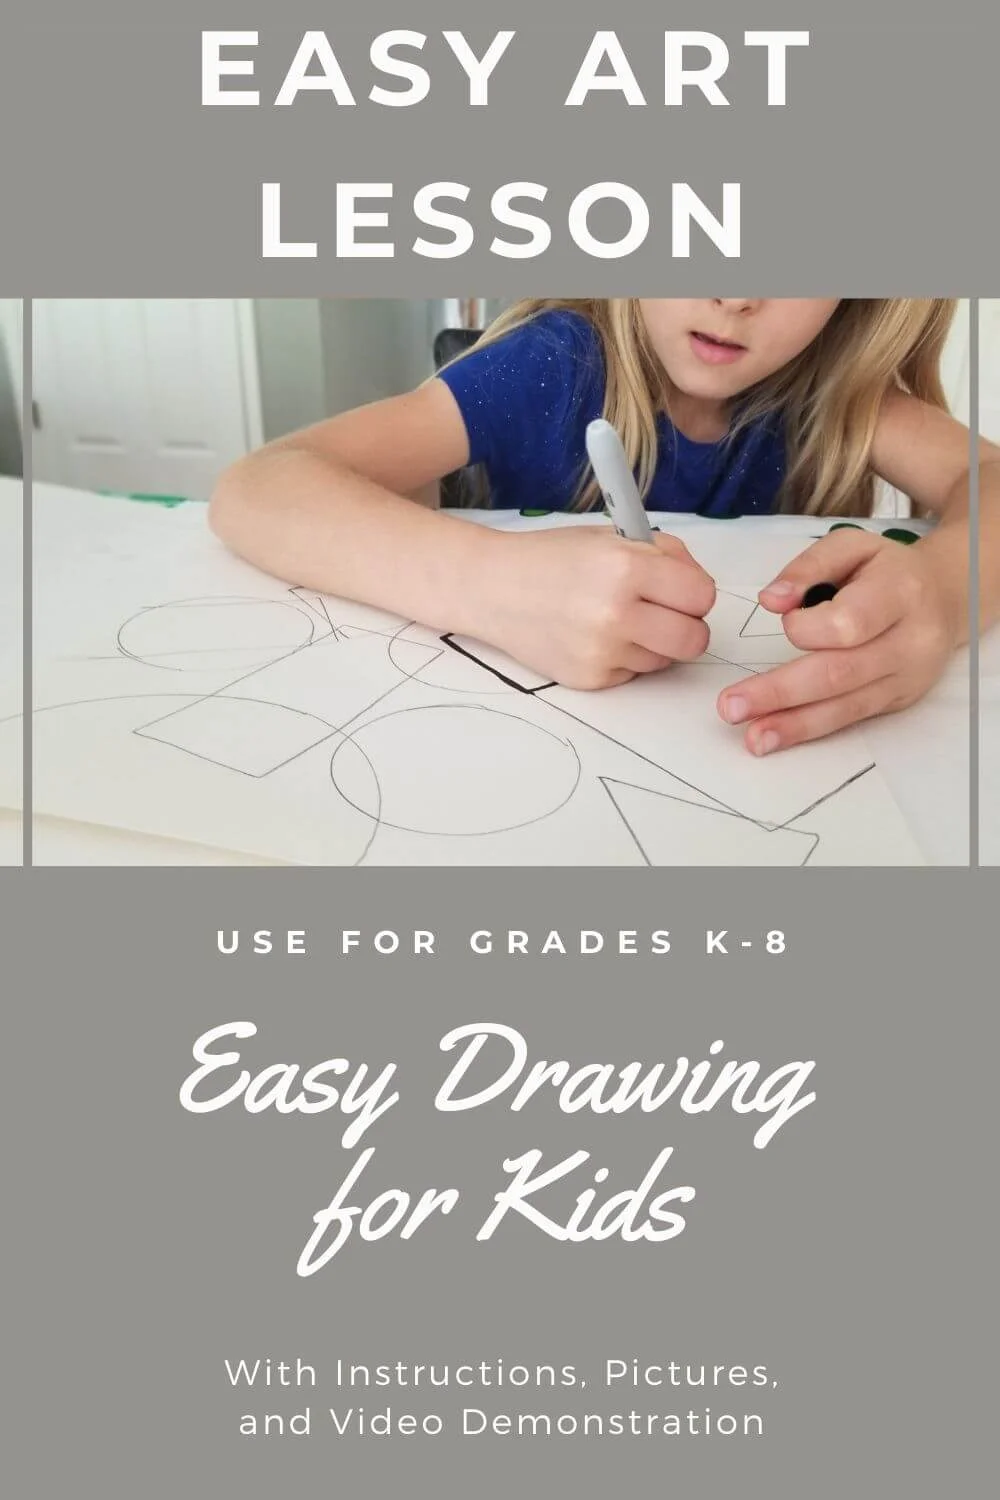 Easy drawing for kids grade K through 8th